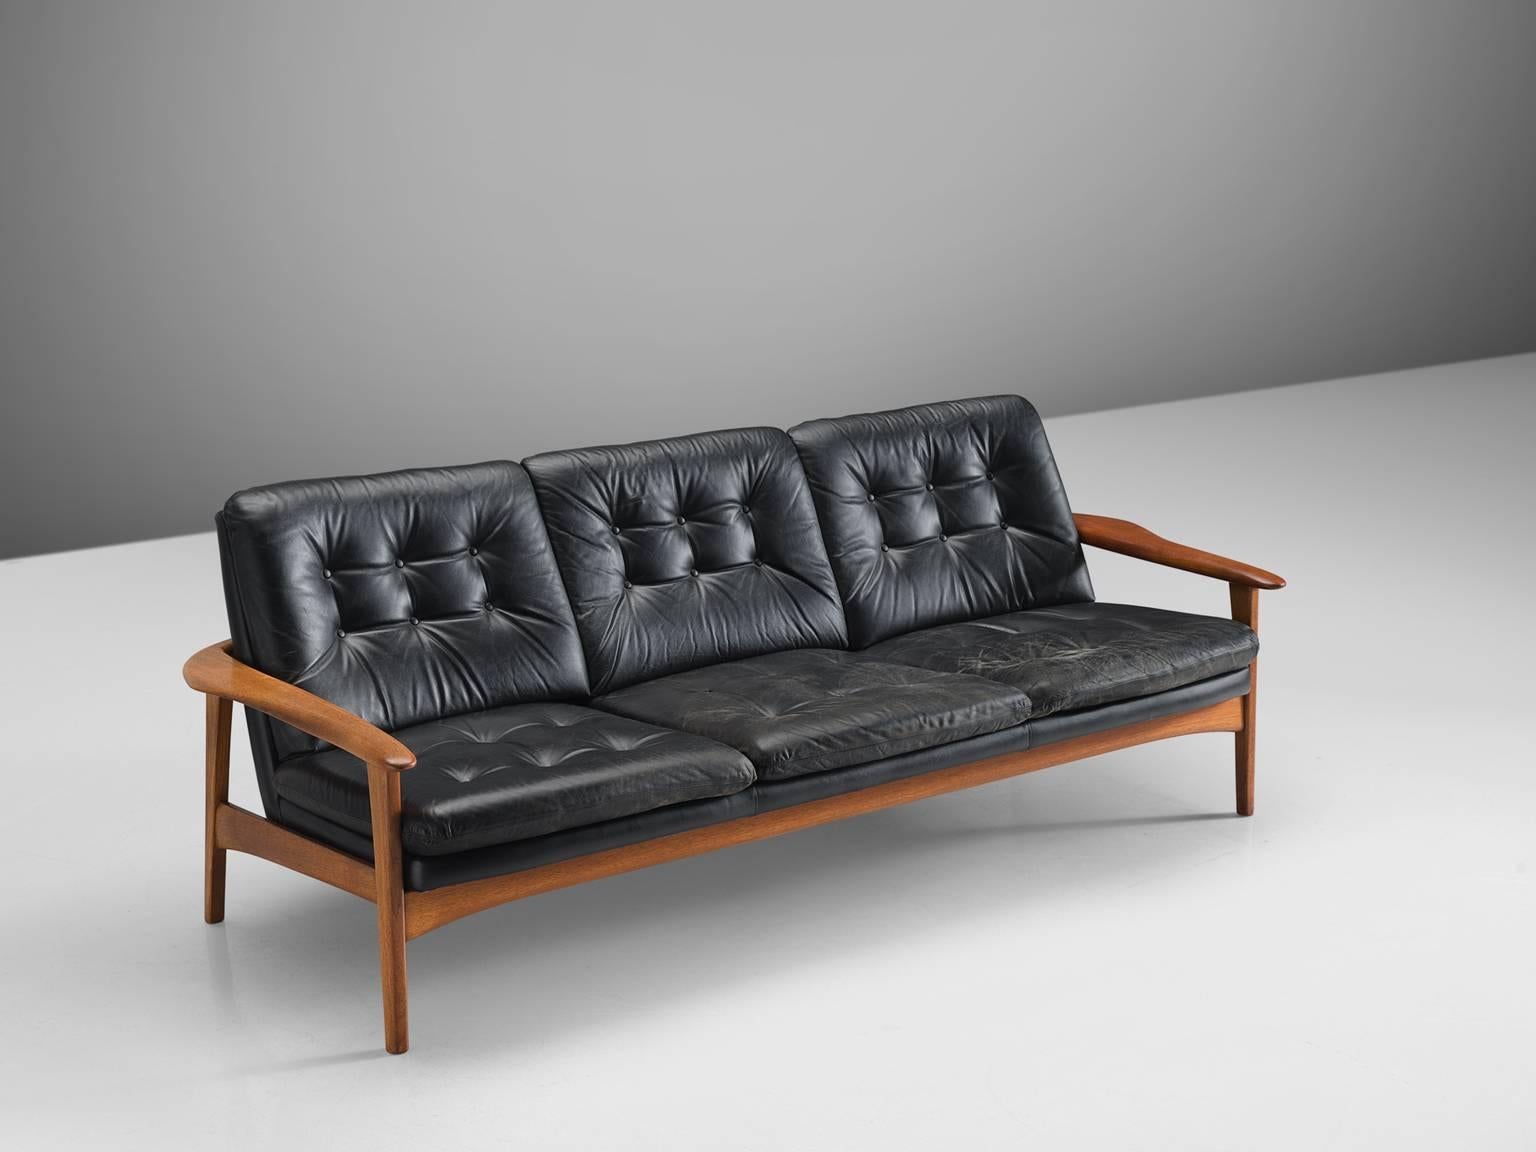 Settee, black leather and teak, Denmark, 1960s.

This three-seat sofa features a teak frame and the back and seat are upholstered in a black tufted leather. The armrest are curved and flow slightly inwards. The sofa's prime distinction is its